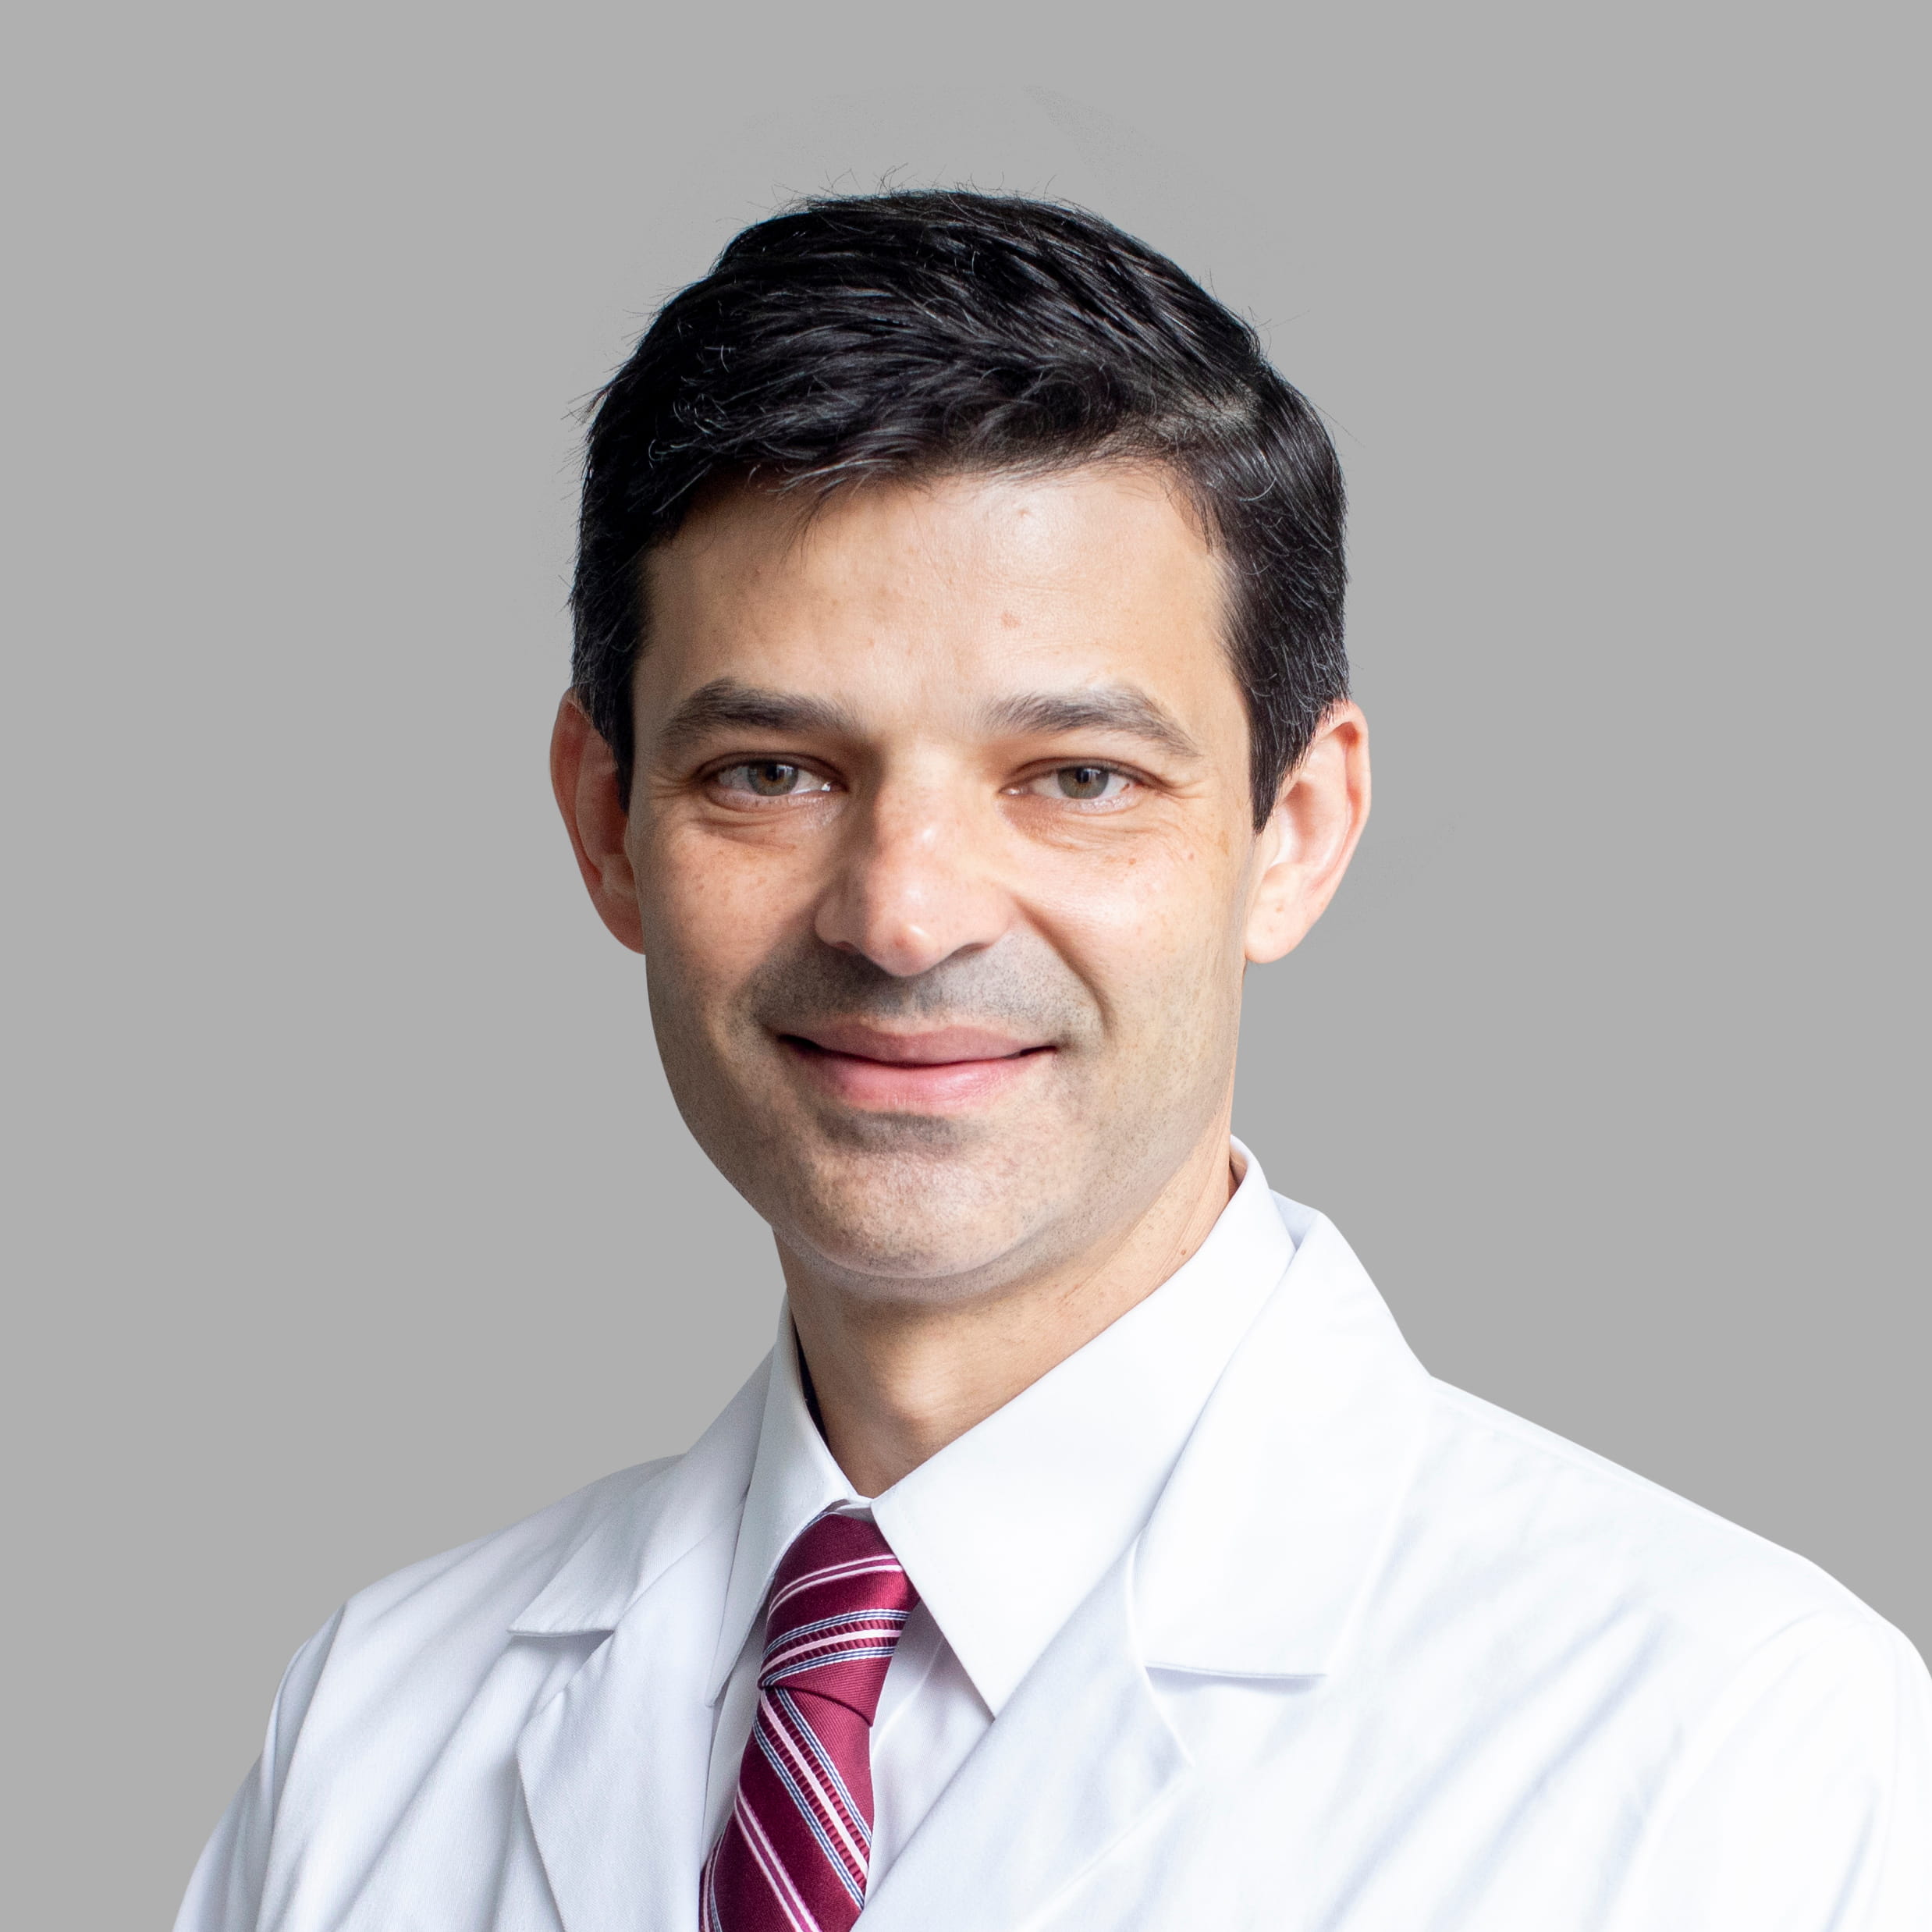 A friendly image of Daniel Fortes, MD